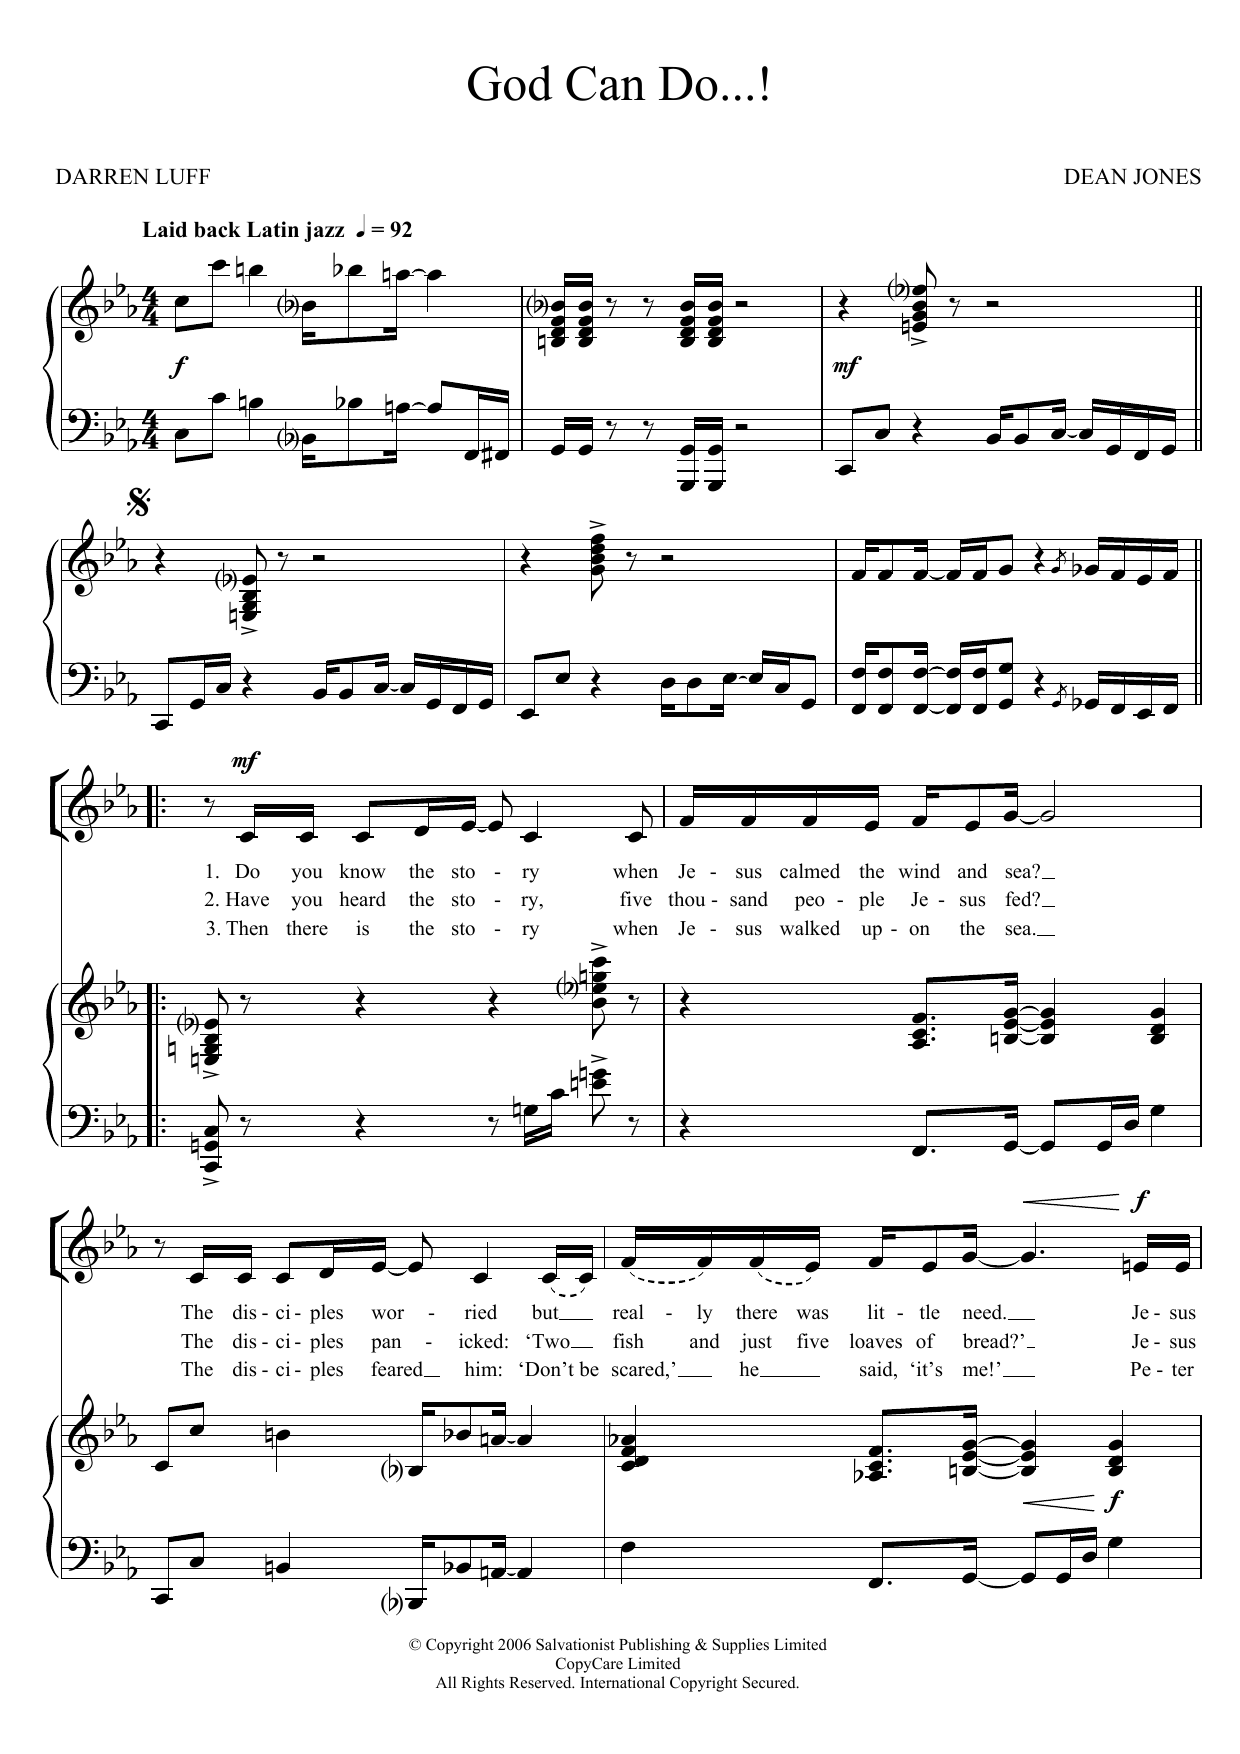 Download The Salvation Army God Can Do Sheet Music